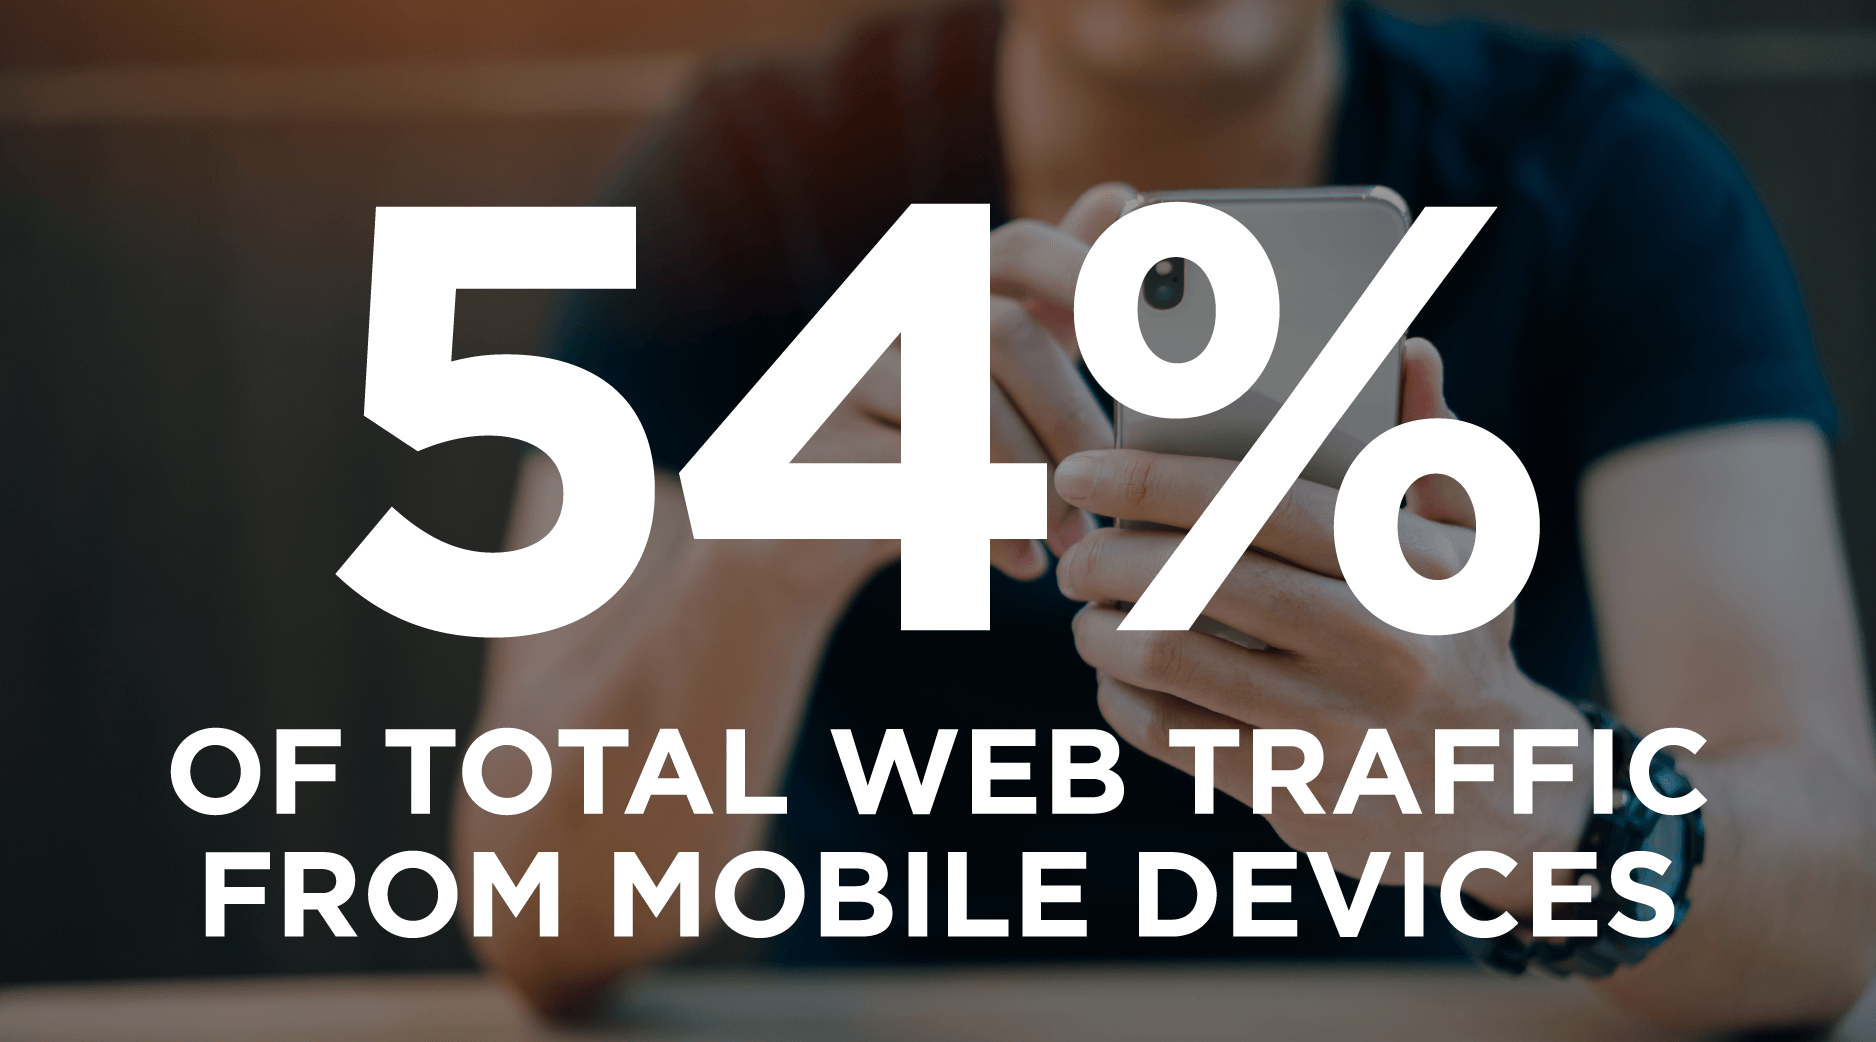 54 percent web traffic from mobile